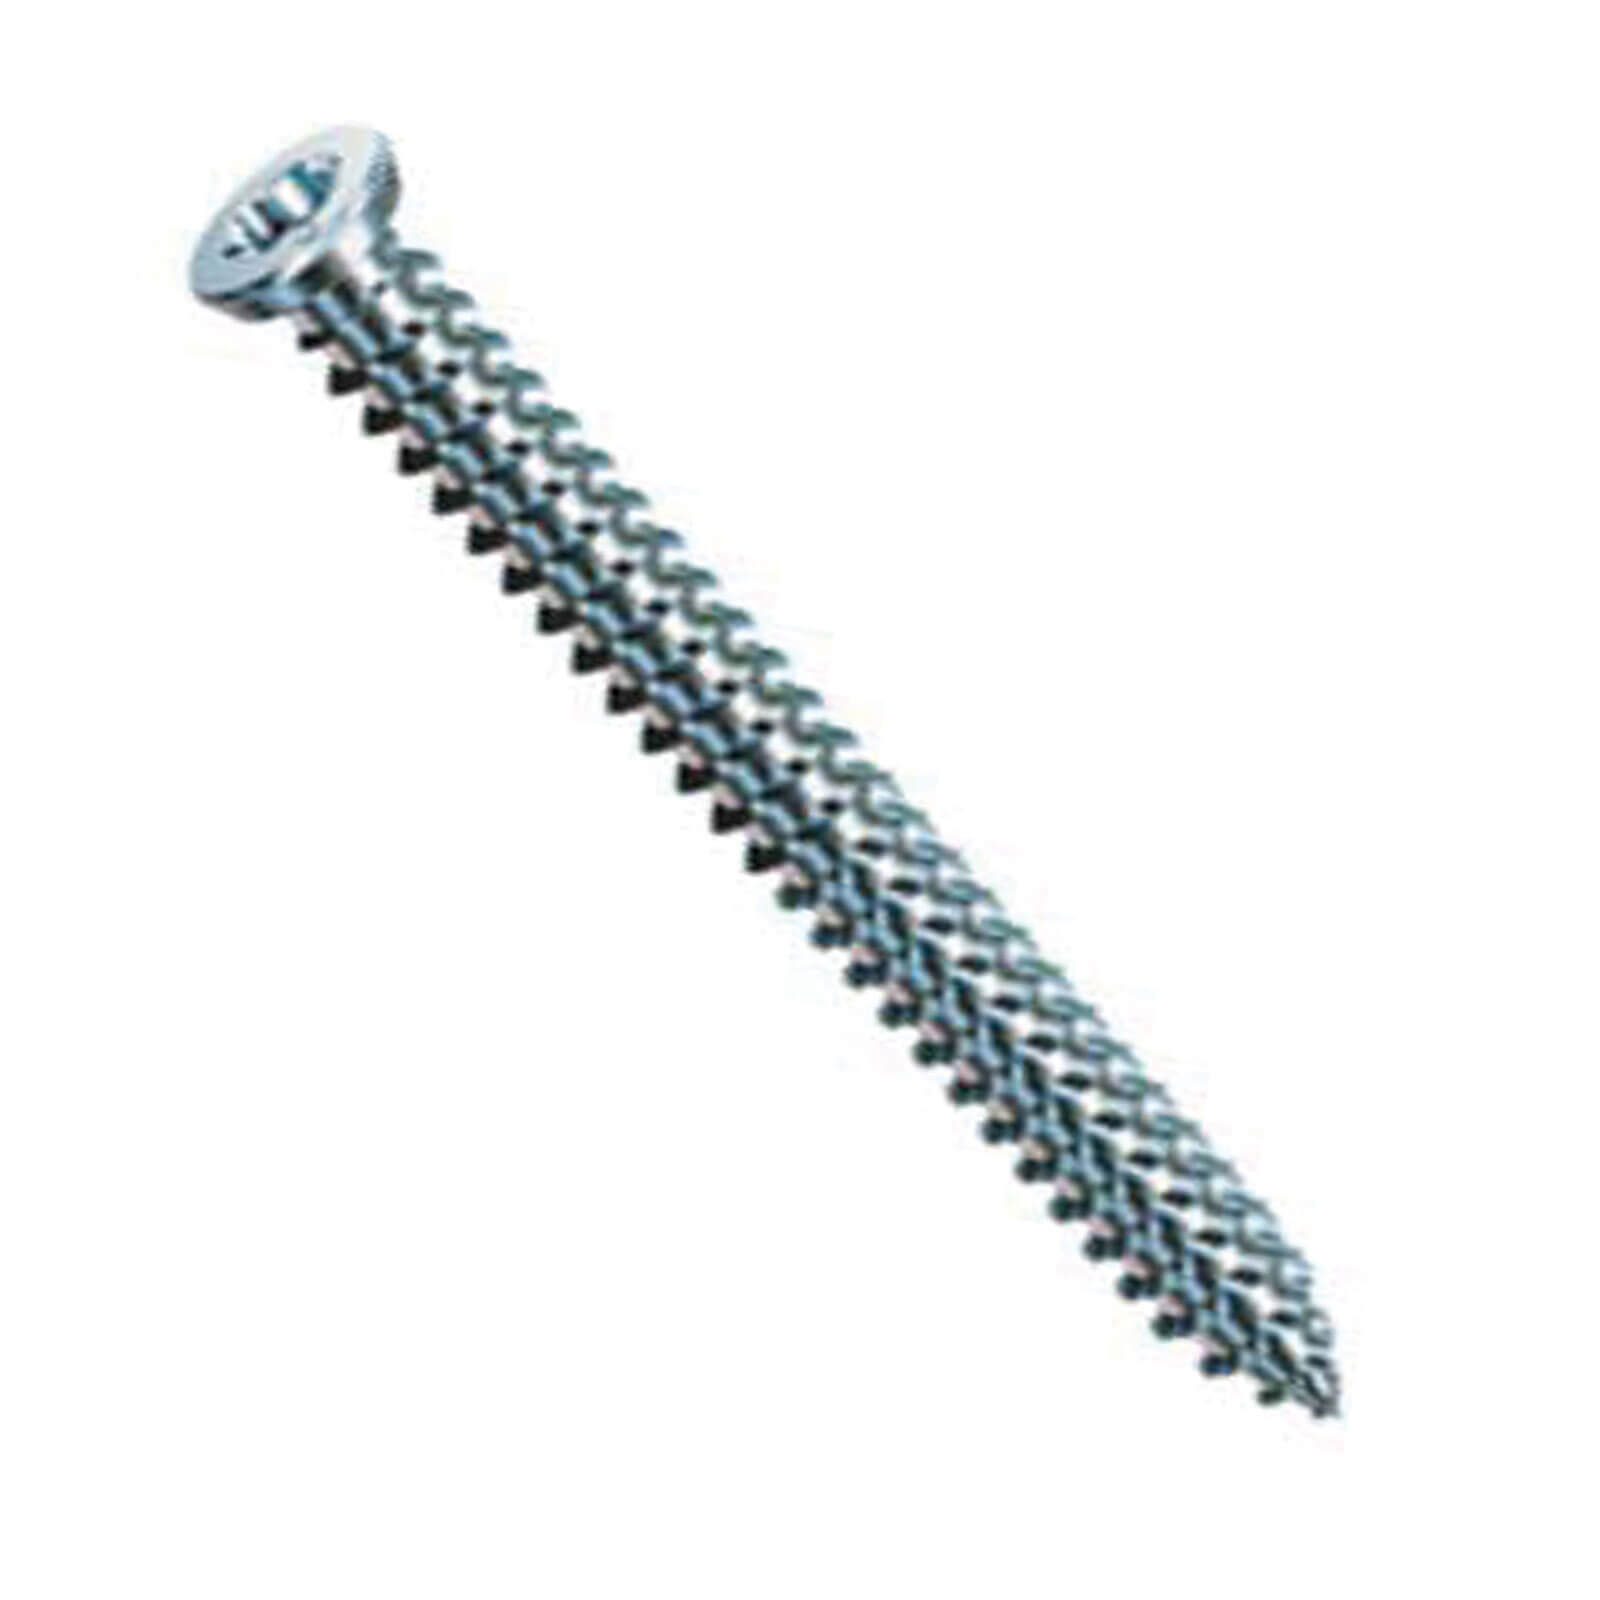 Image of Spax RA Countersunk Torx Frame Anchor Screws 7.5mm 60mm Pack of 100